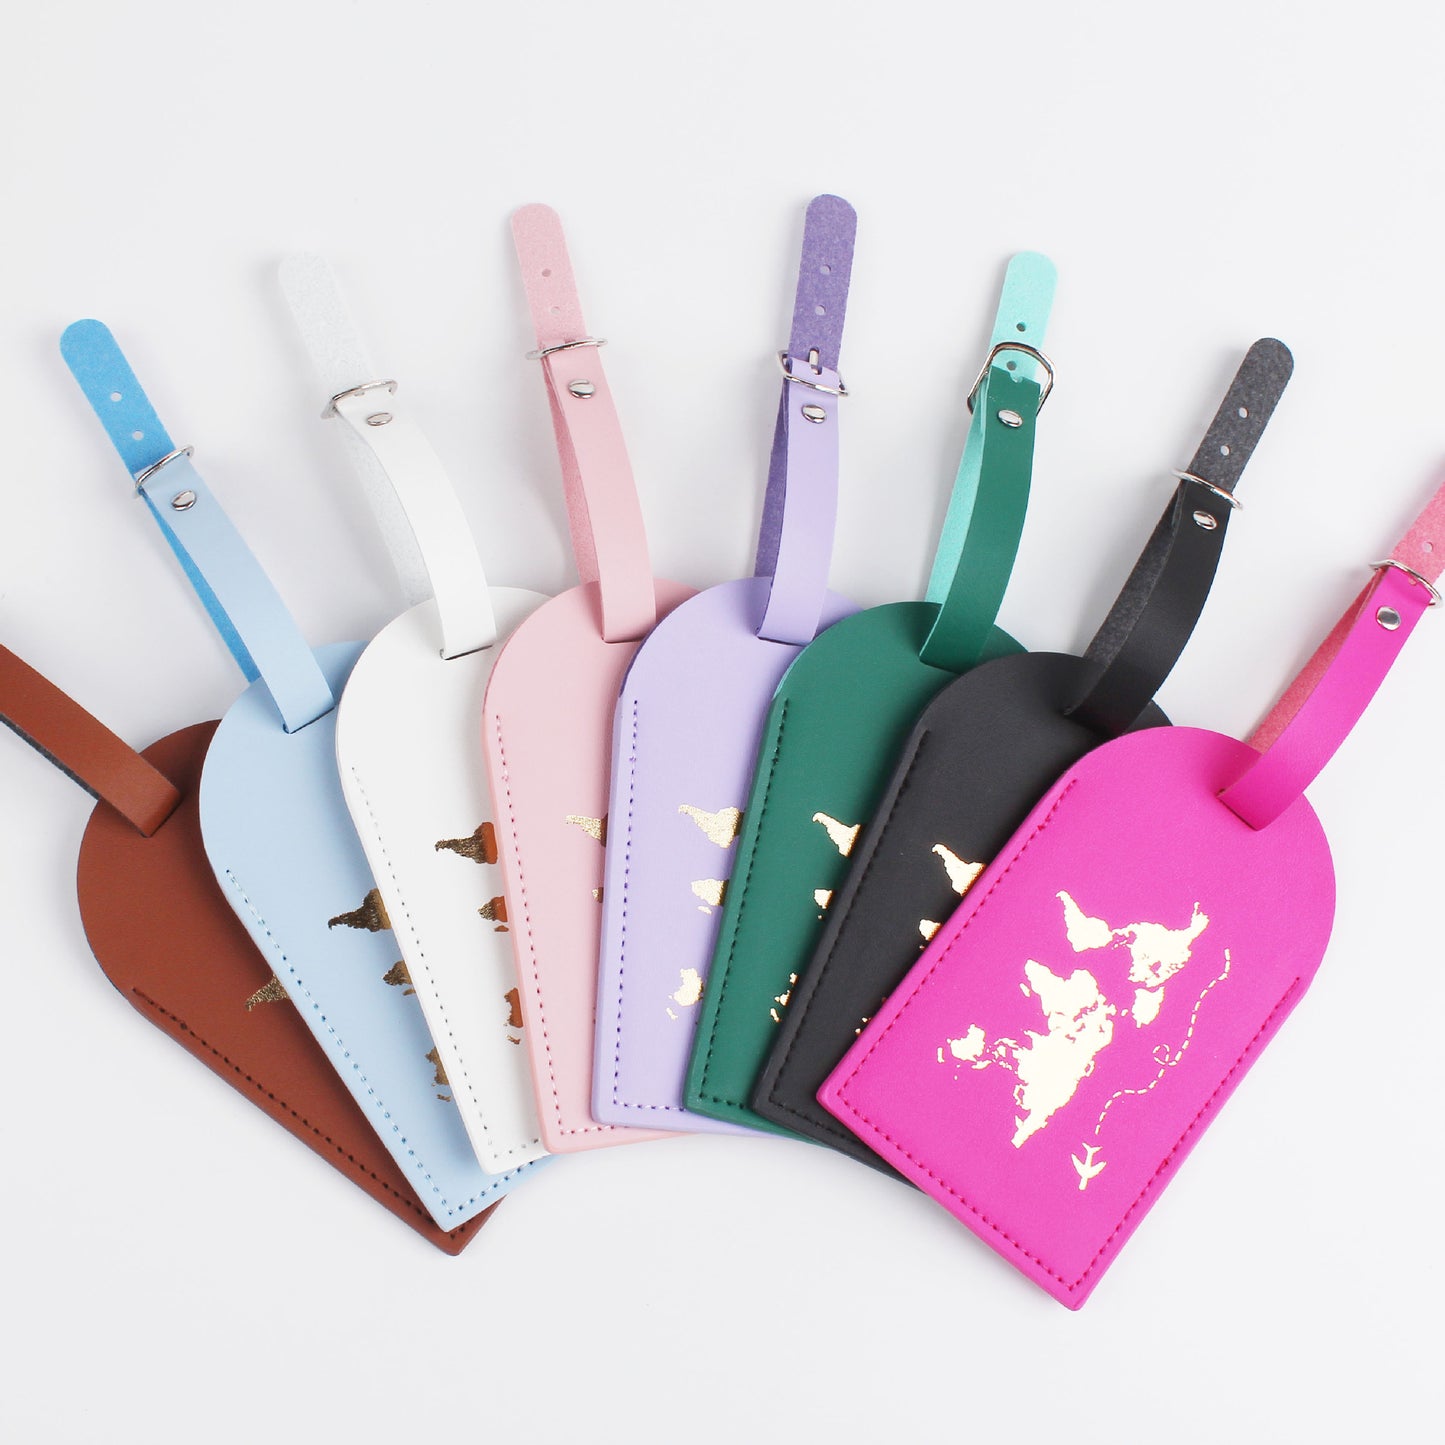 New Products Luggage Tag PU Leather Name Tag*